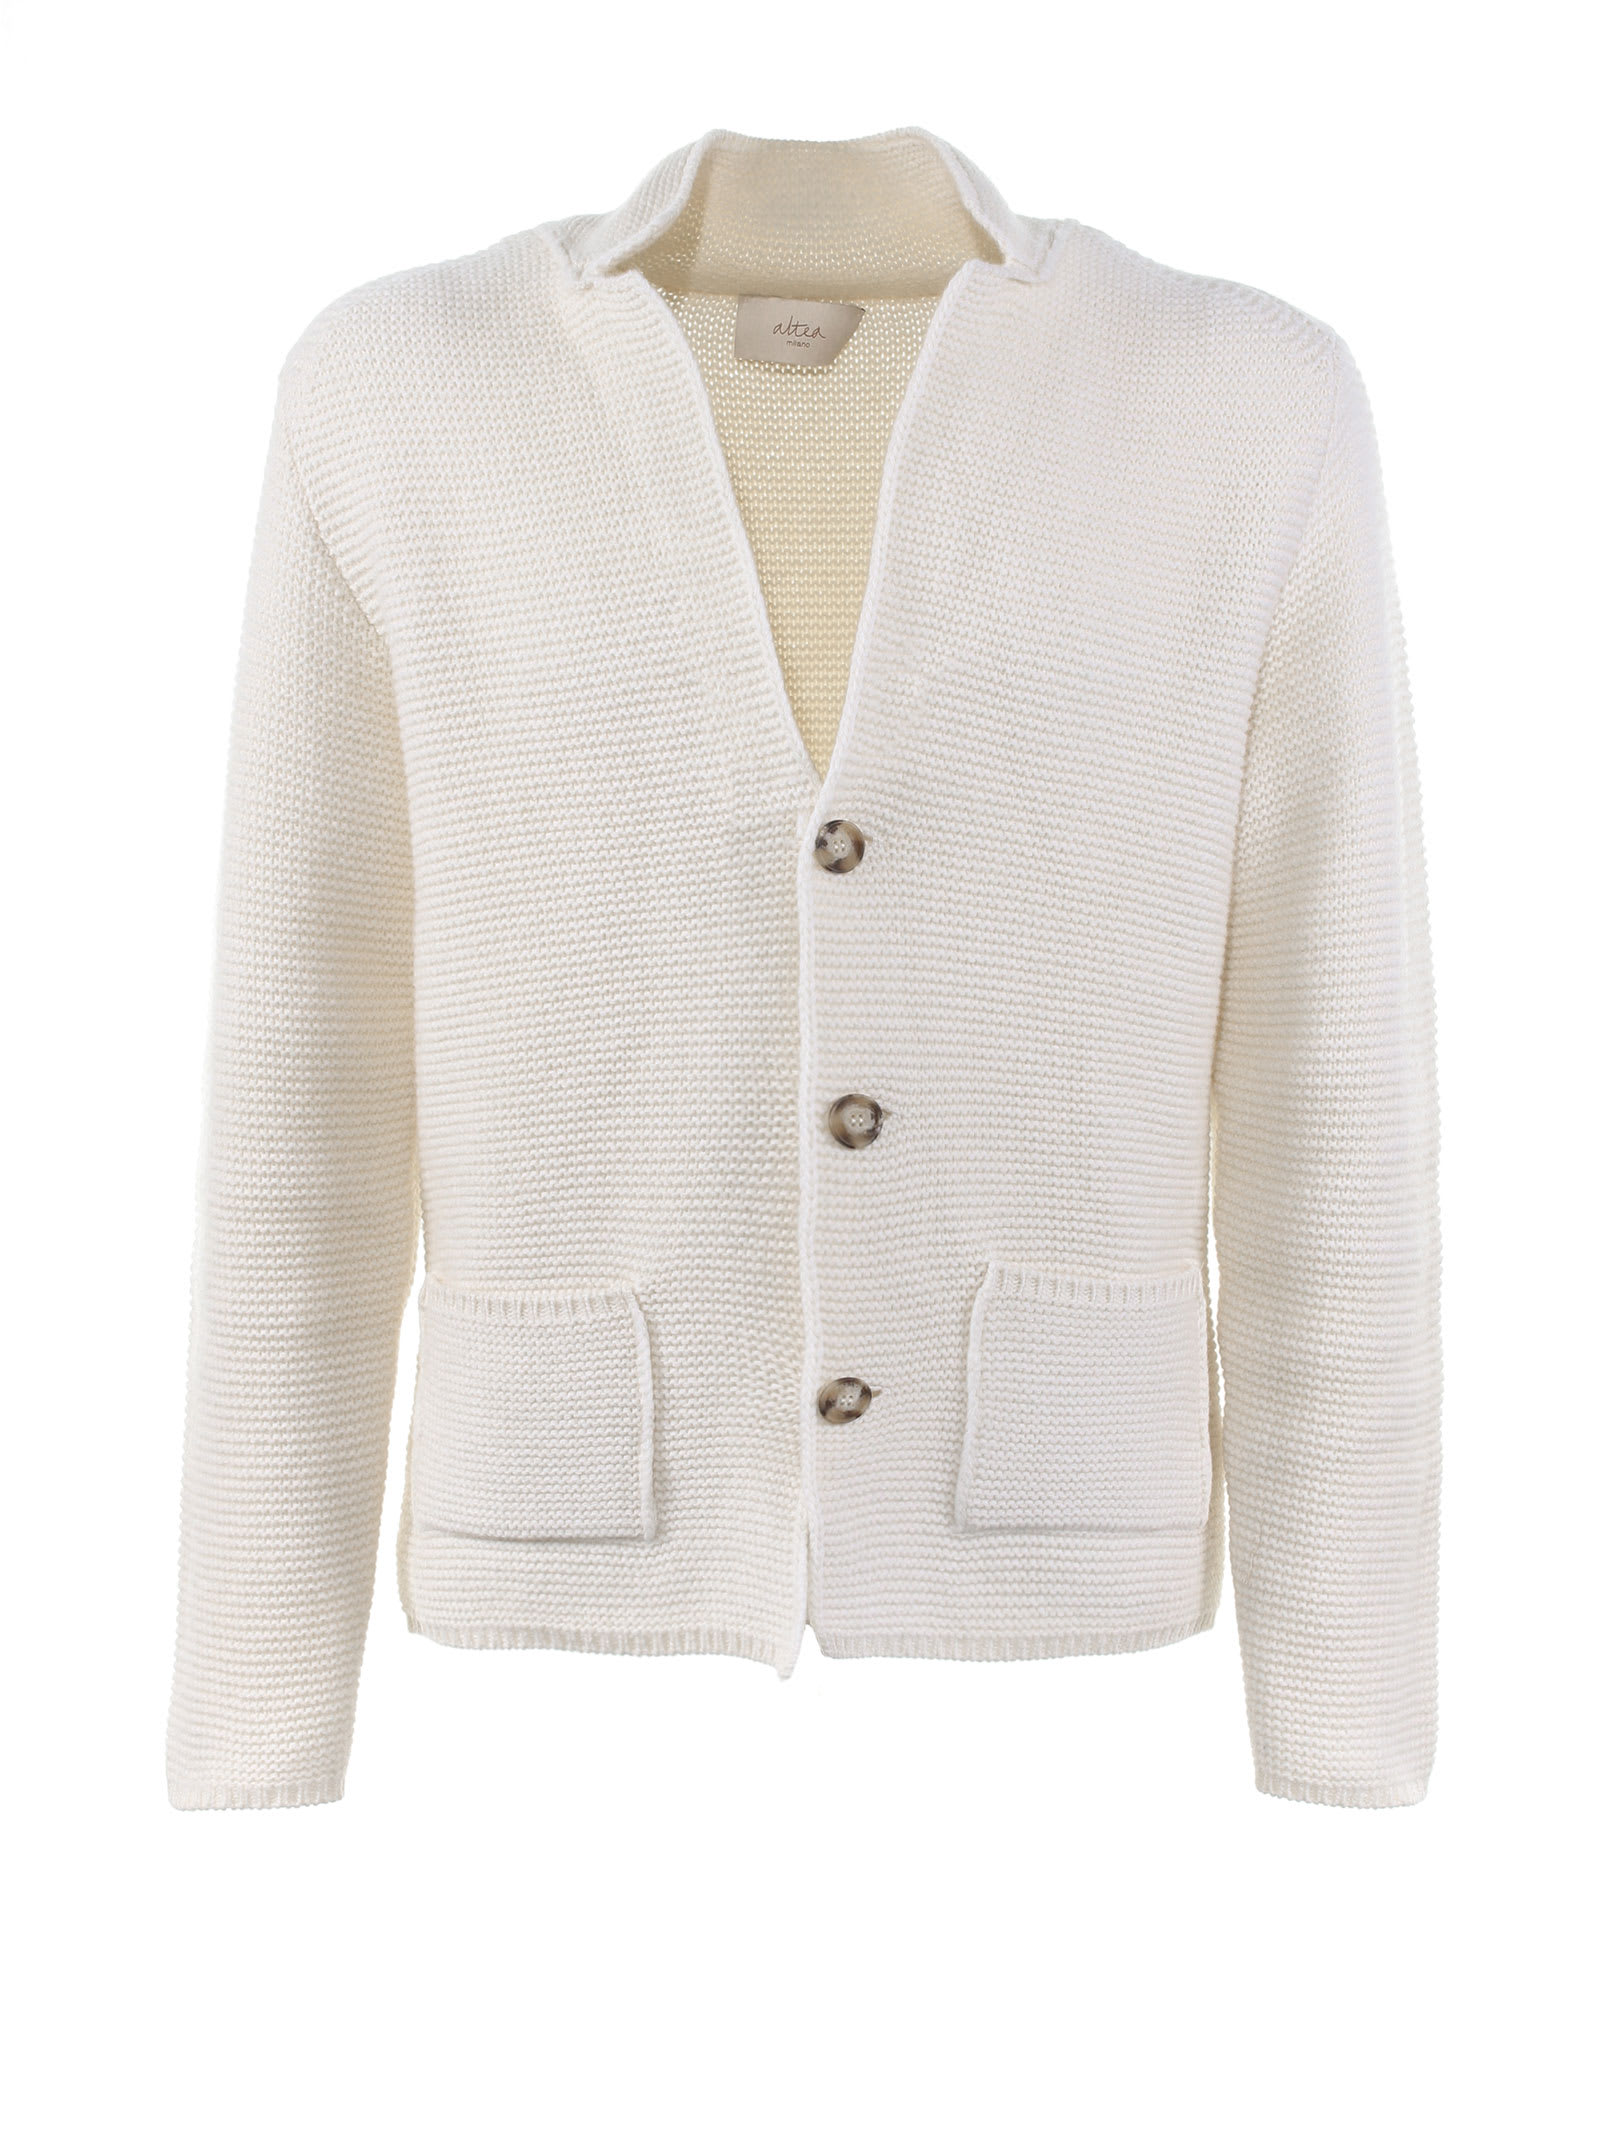 Altea Cardigan Jacket With Buttons